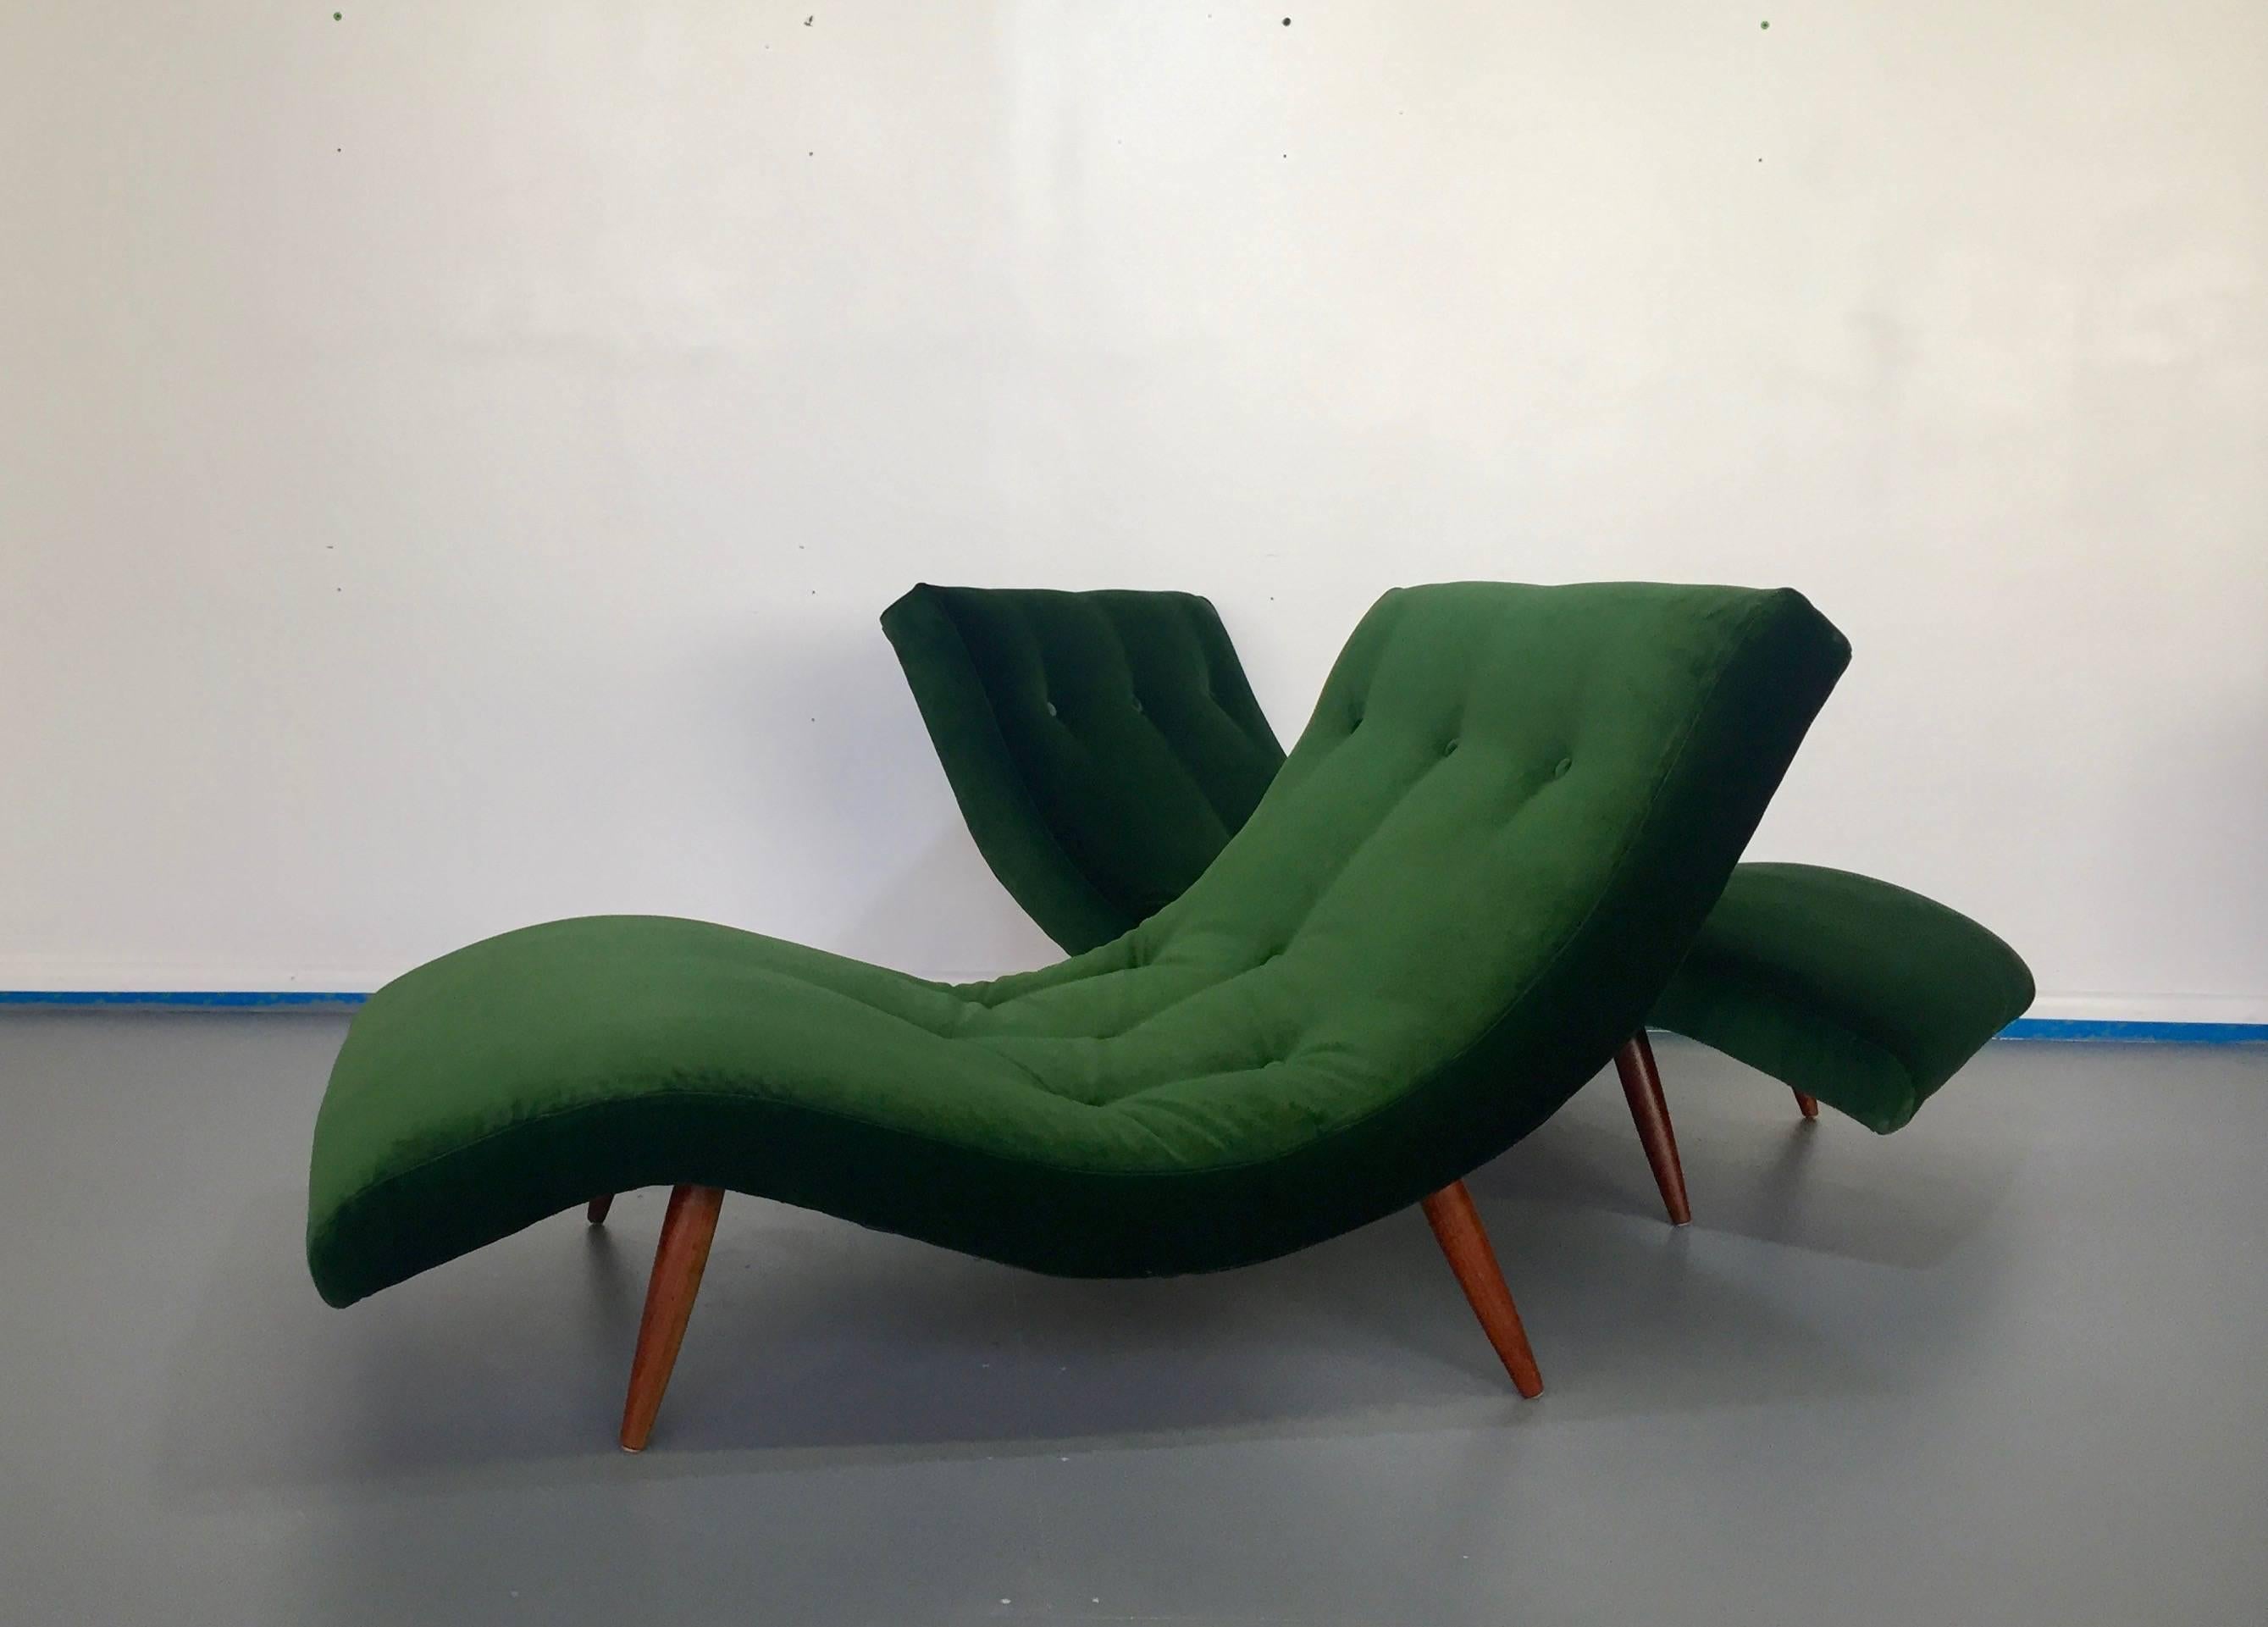 An undulating Adrian Pearsall wave lounge chair in luscious deep green velvet.

A complete ground up refinishing with original walnut legs, new foam and high quality velvet fabric.

Adrian Pearsall worked in that extraordinary period with Harvey